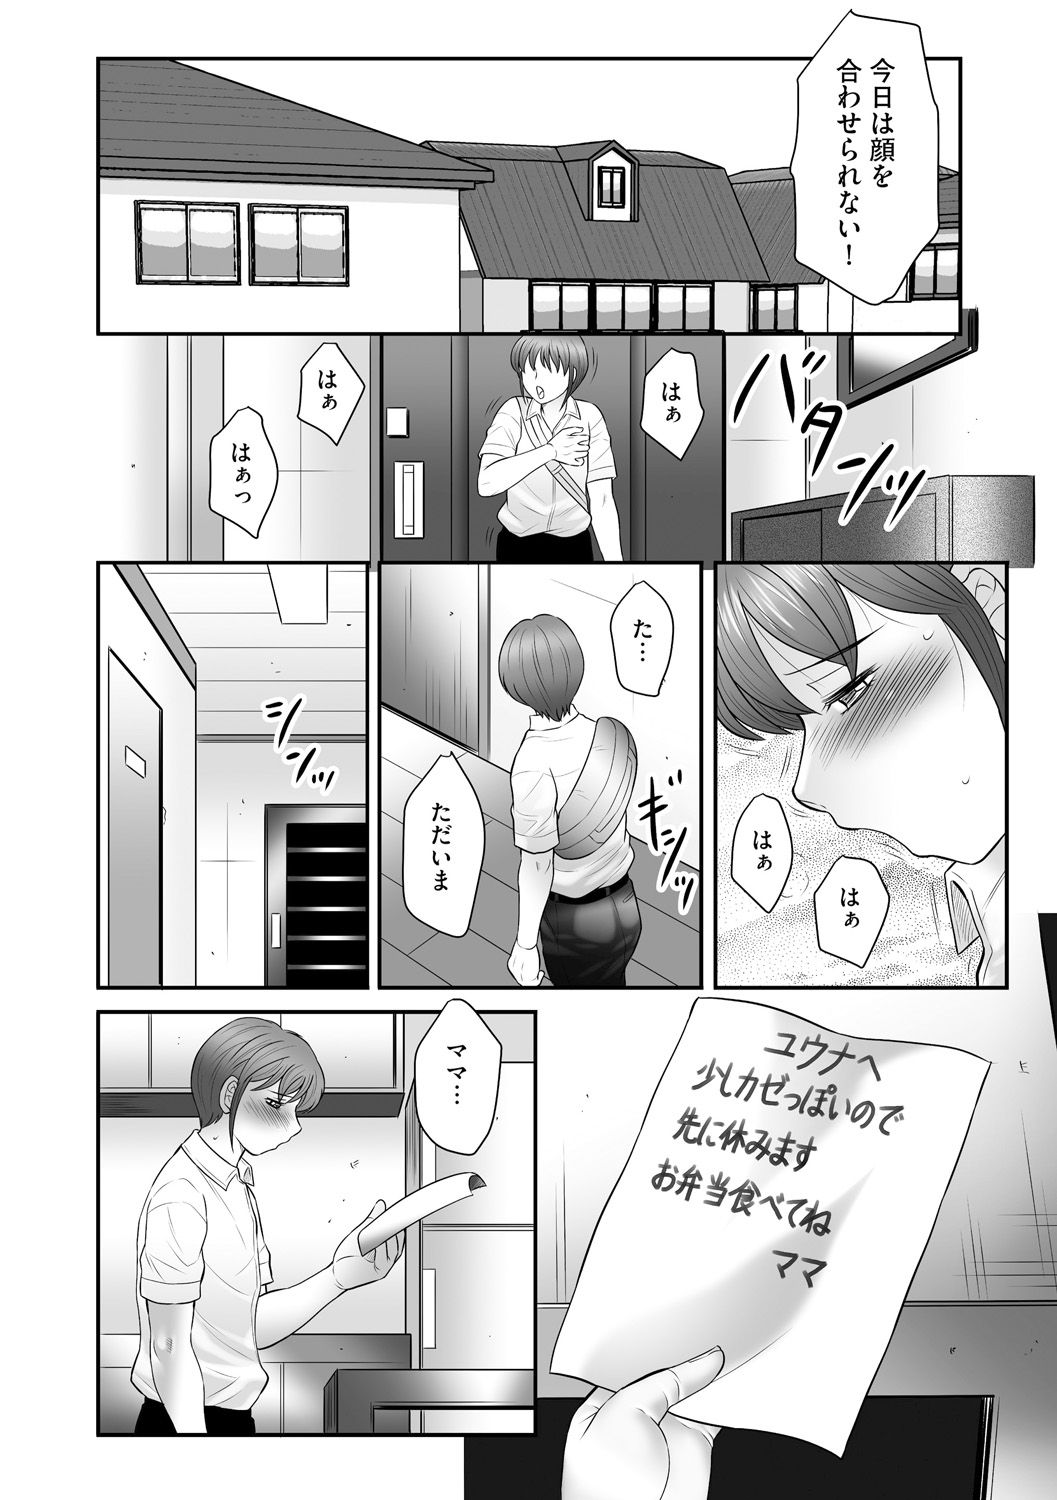 [Fuusen Club] Boshi no Susume - The advice of the mother and child Ch. 9 (Magazine Cyberia Vol. 68) [Digital] [風船クラブ] 母子のすすめ 第9話 (マガジンサイベリア Vol.68) [DL版]